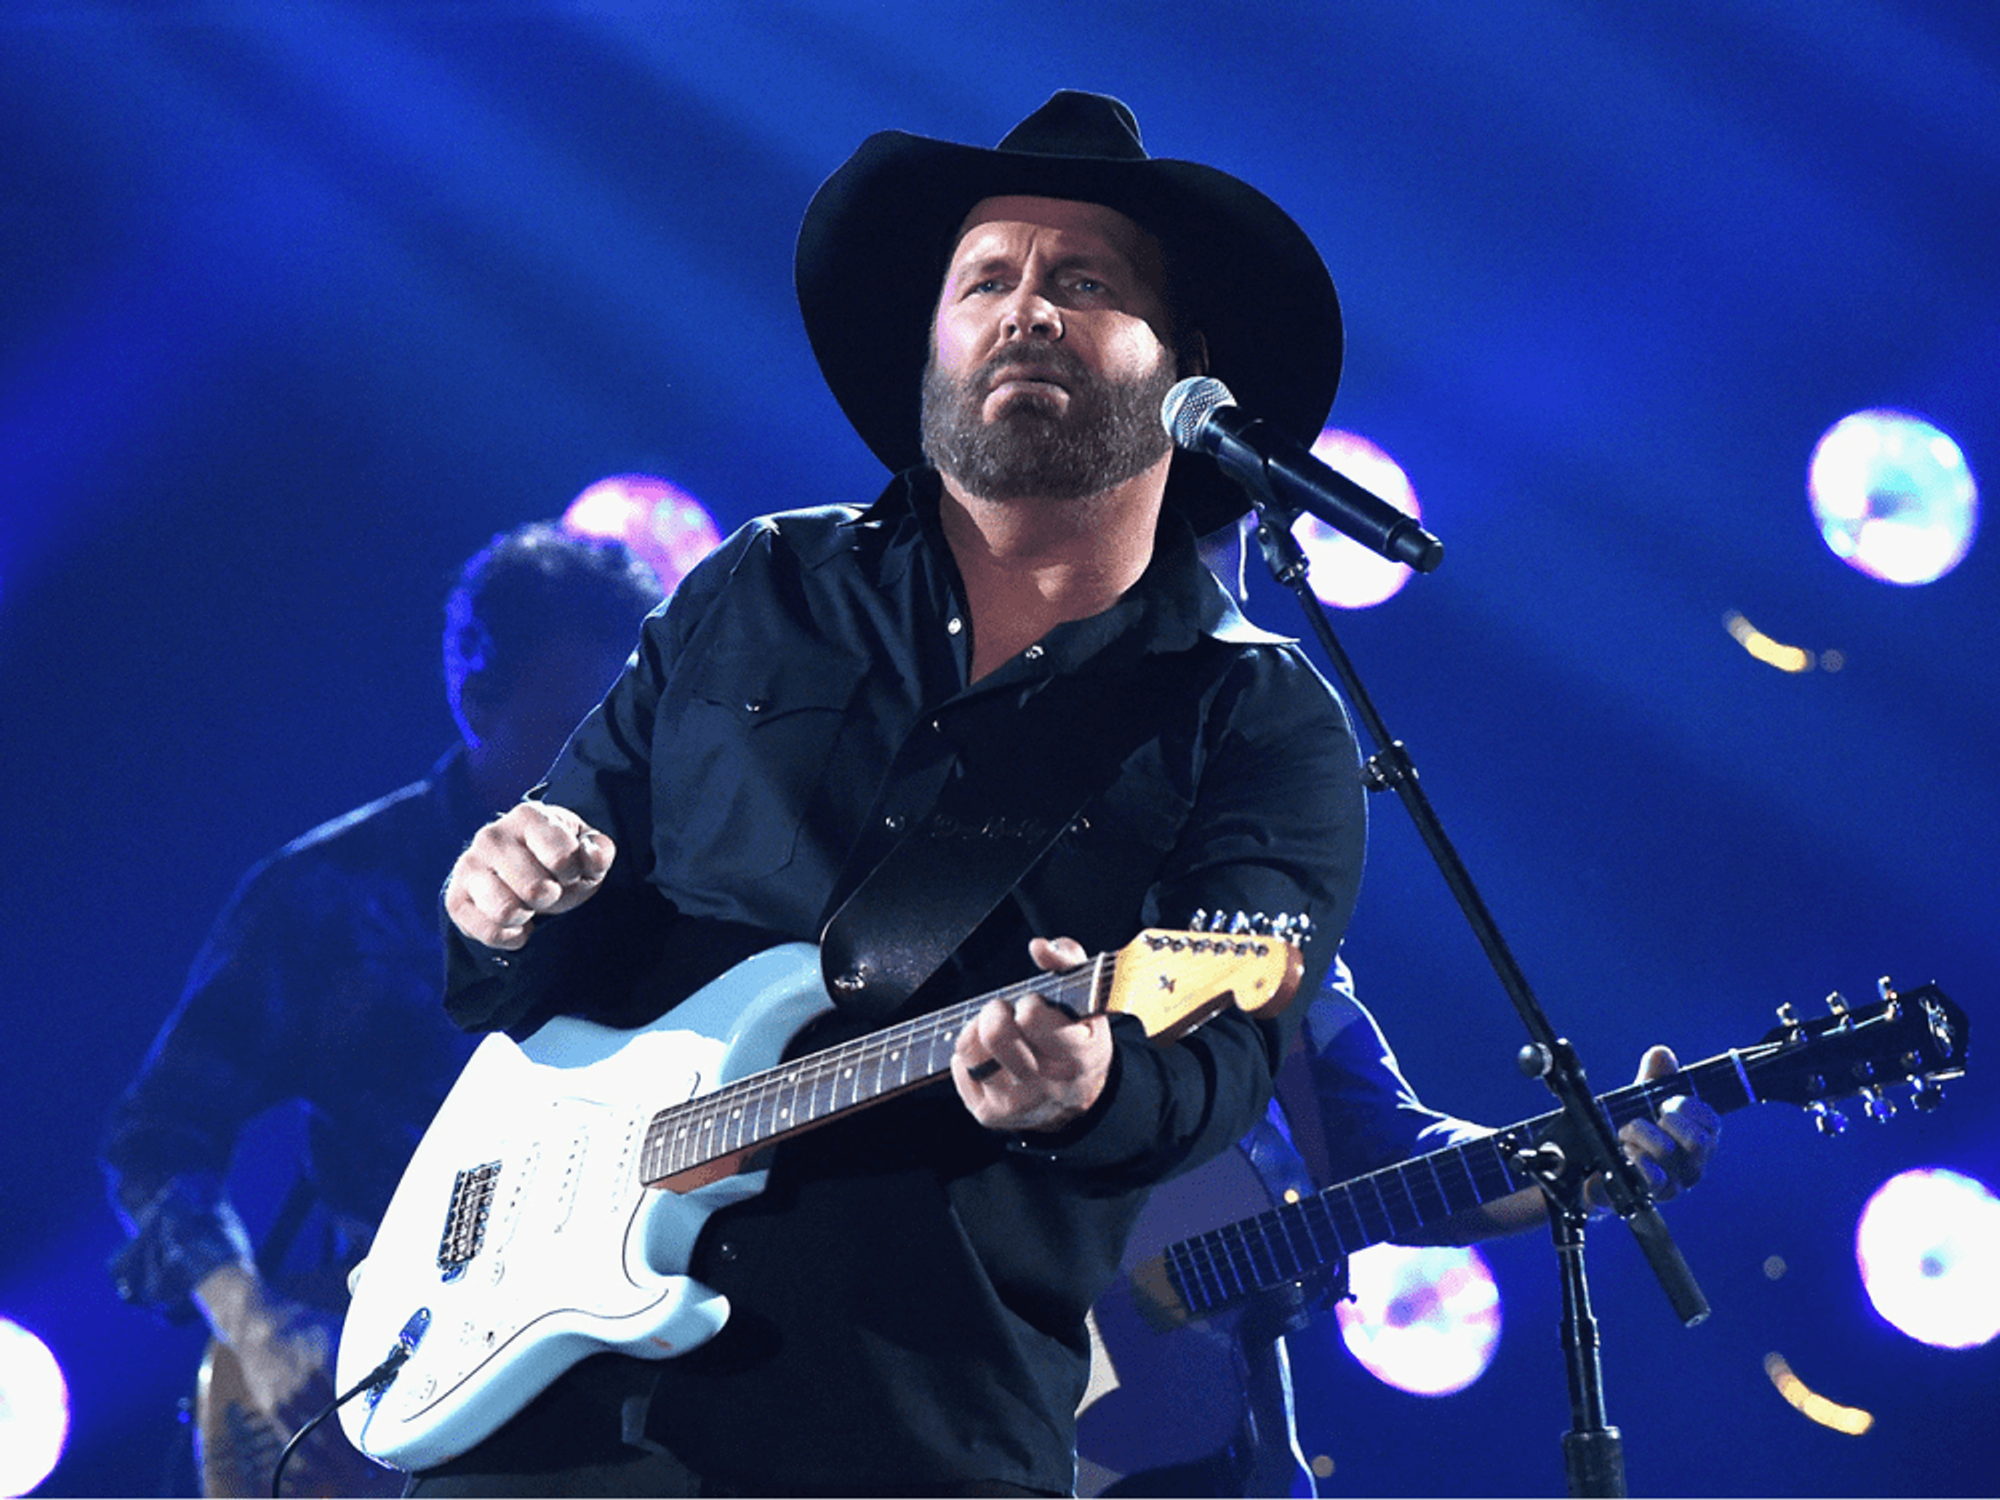 Garth Brooks is headlining RodeoHouston 2018, but there's a long list of acts that could follow.